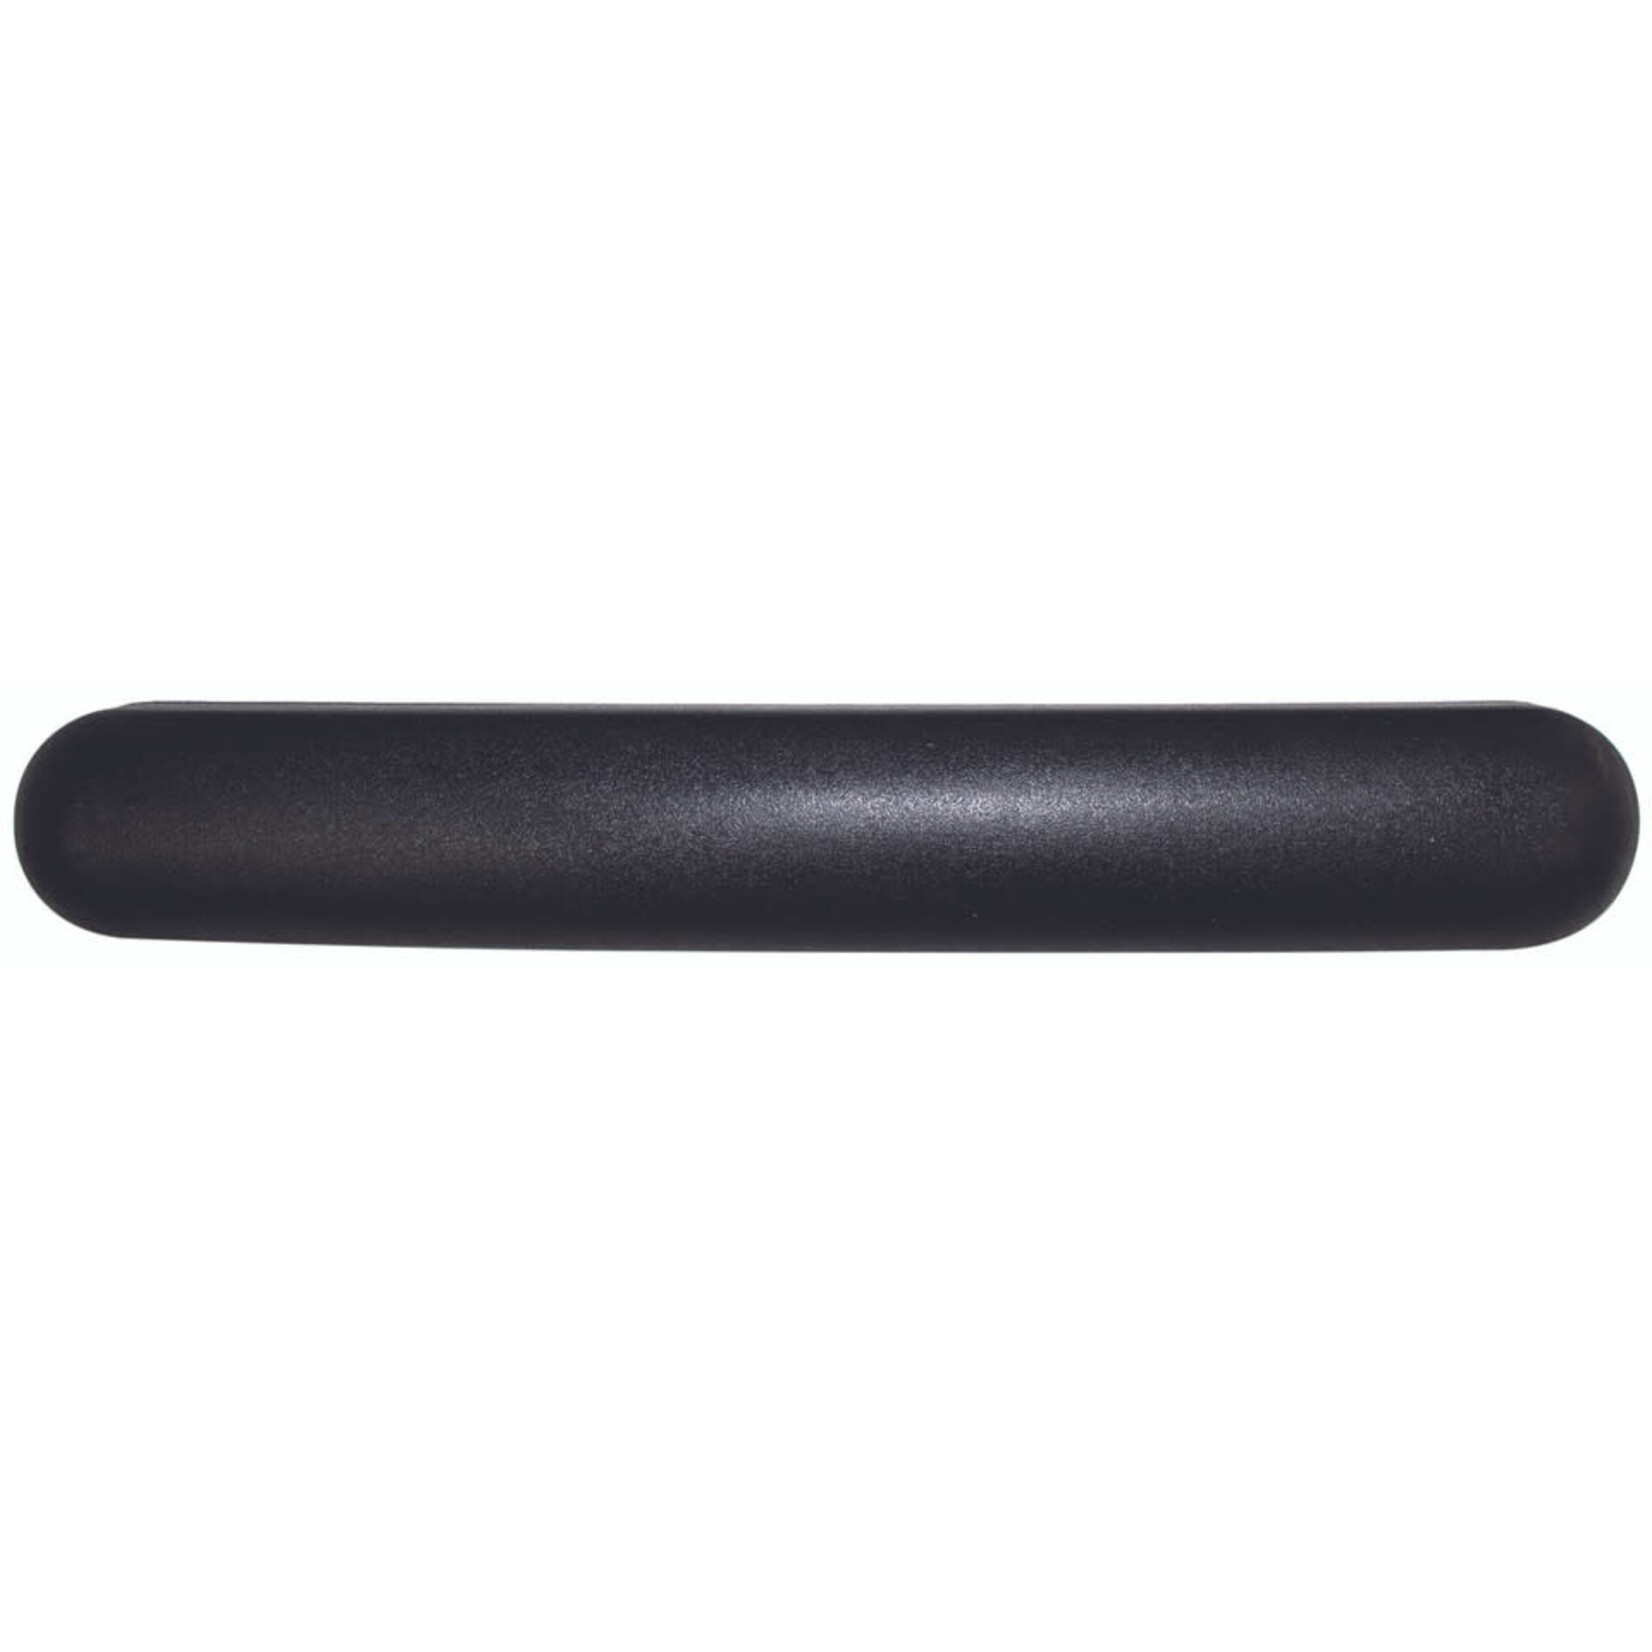 New Soutions Urethane Universal Full Length Arm Rest